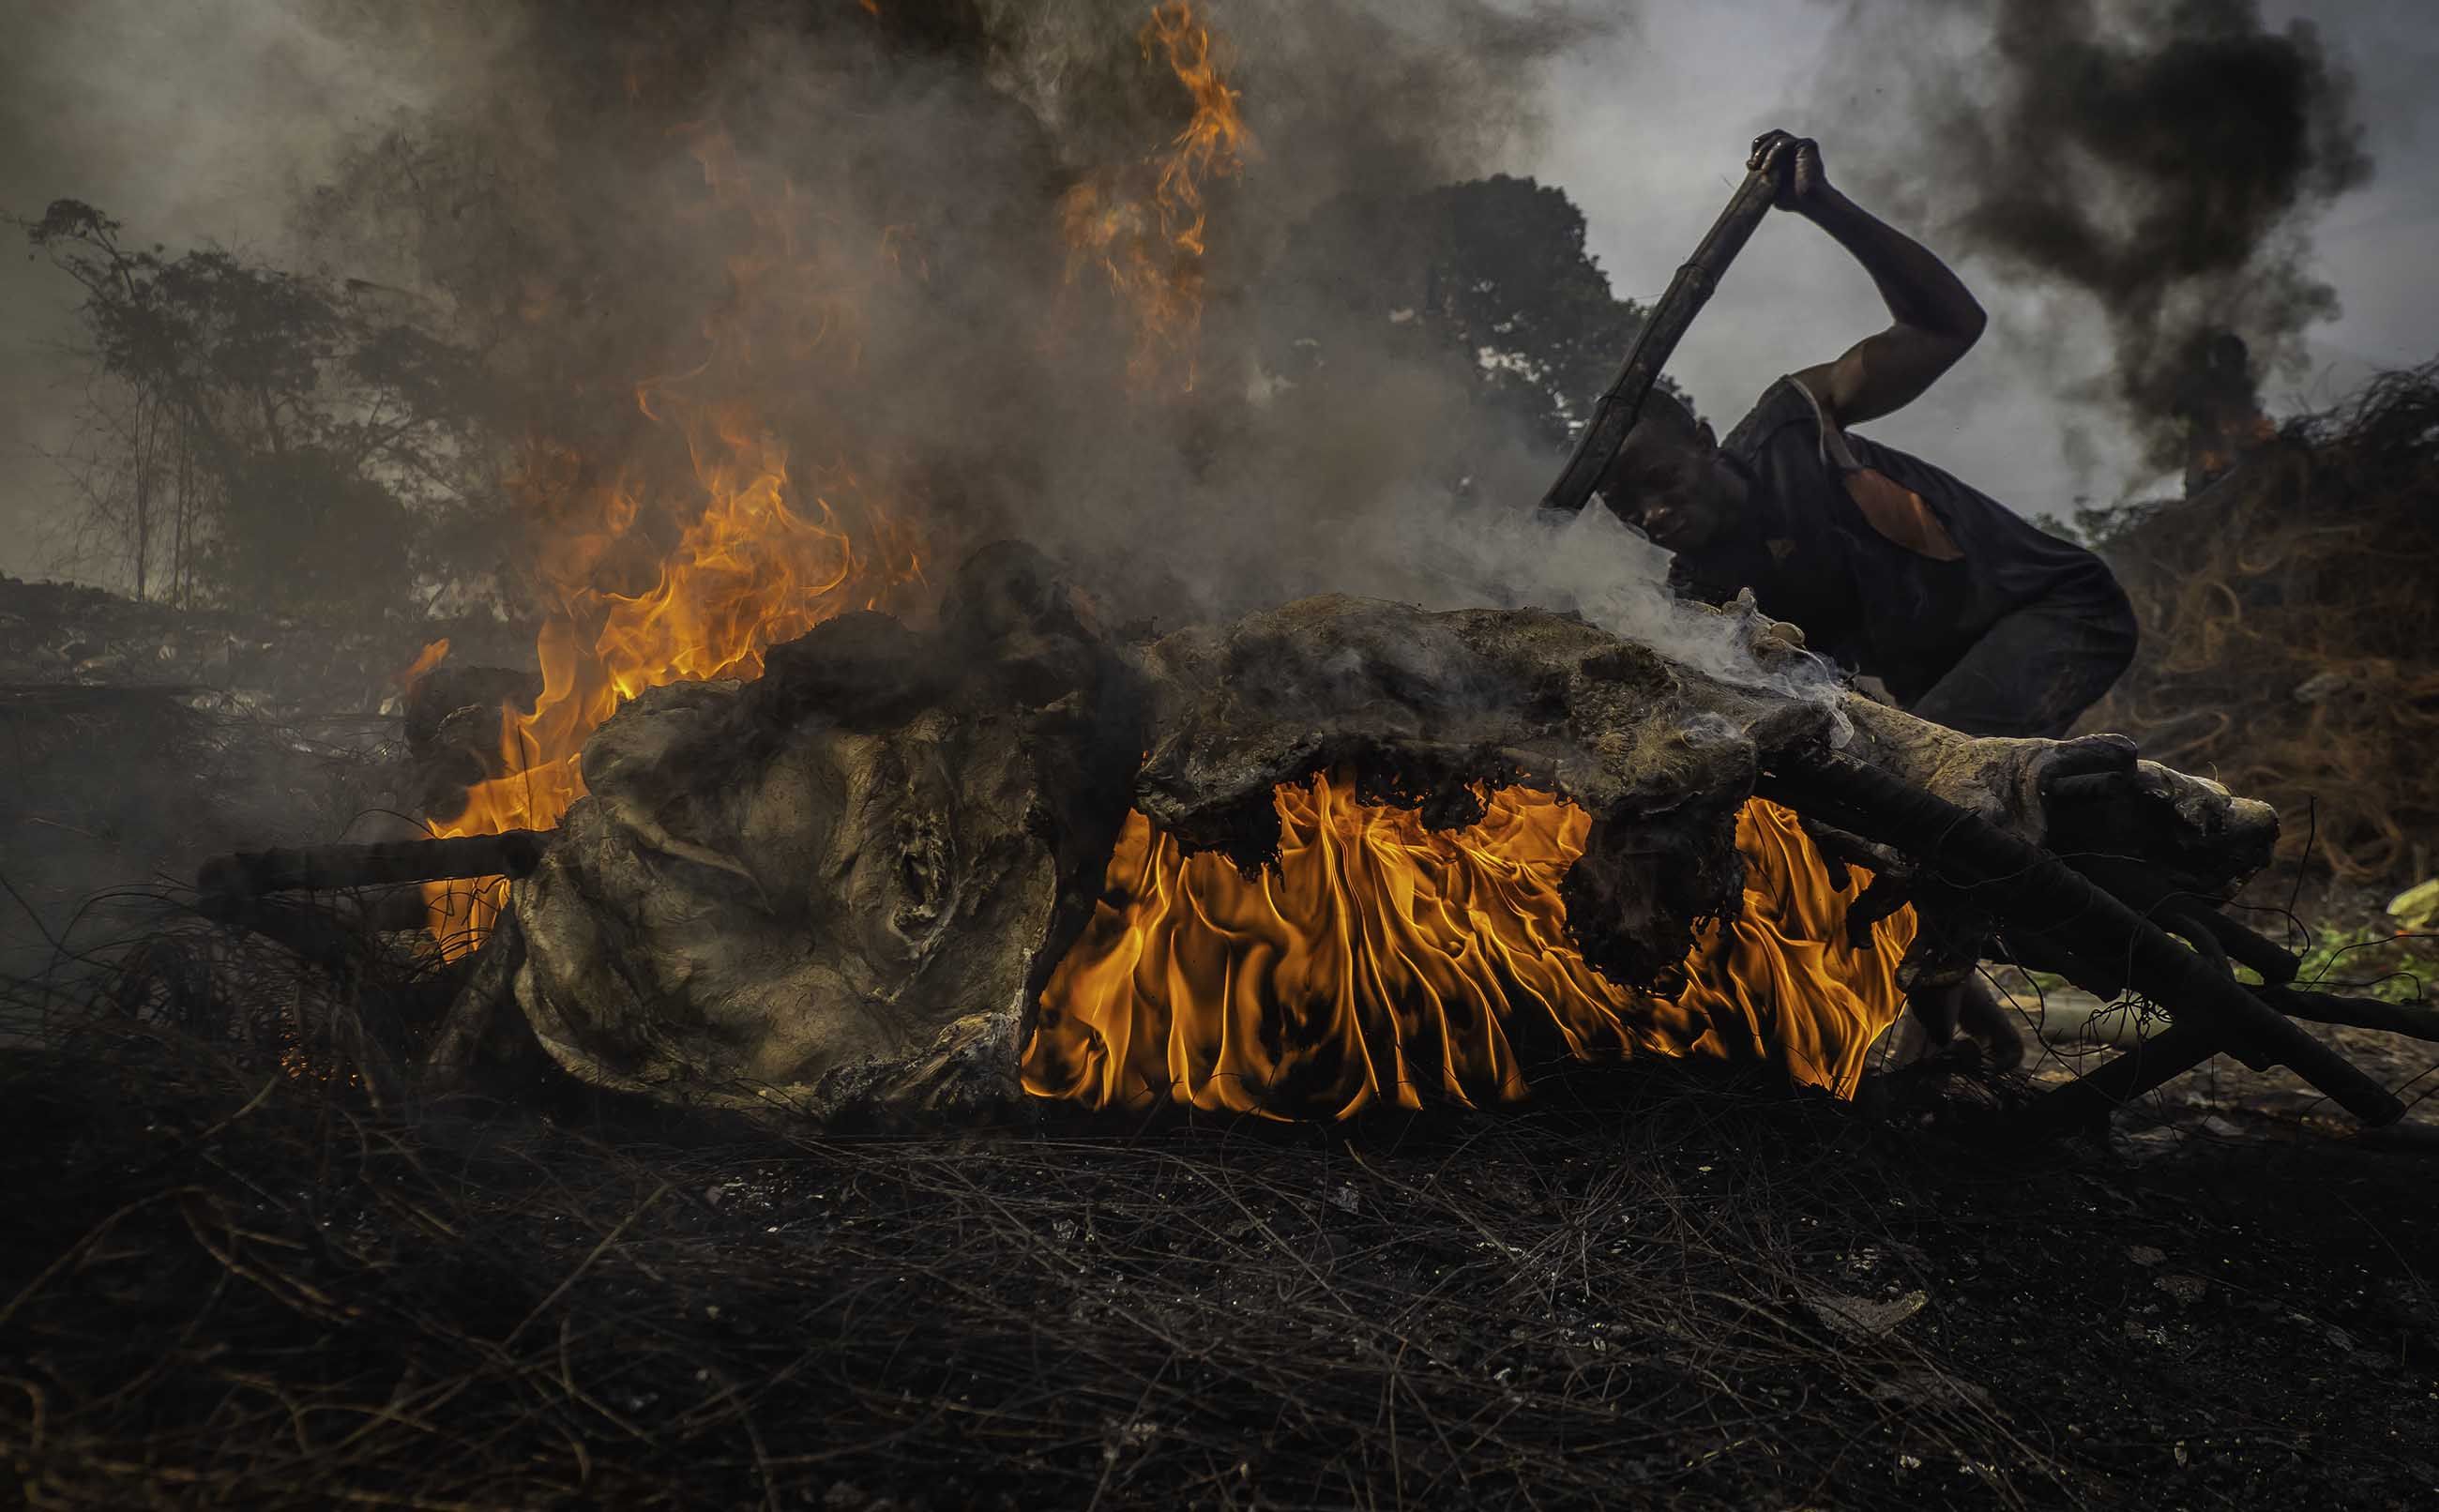 Atop mounds of copper wire, animal bones, and discarded tires, fires burn day and night in Onitsha. Image by Larry C. Price. Nigeria, 2018.